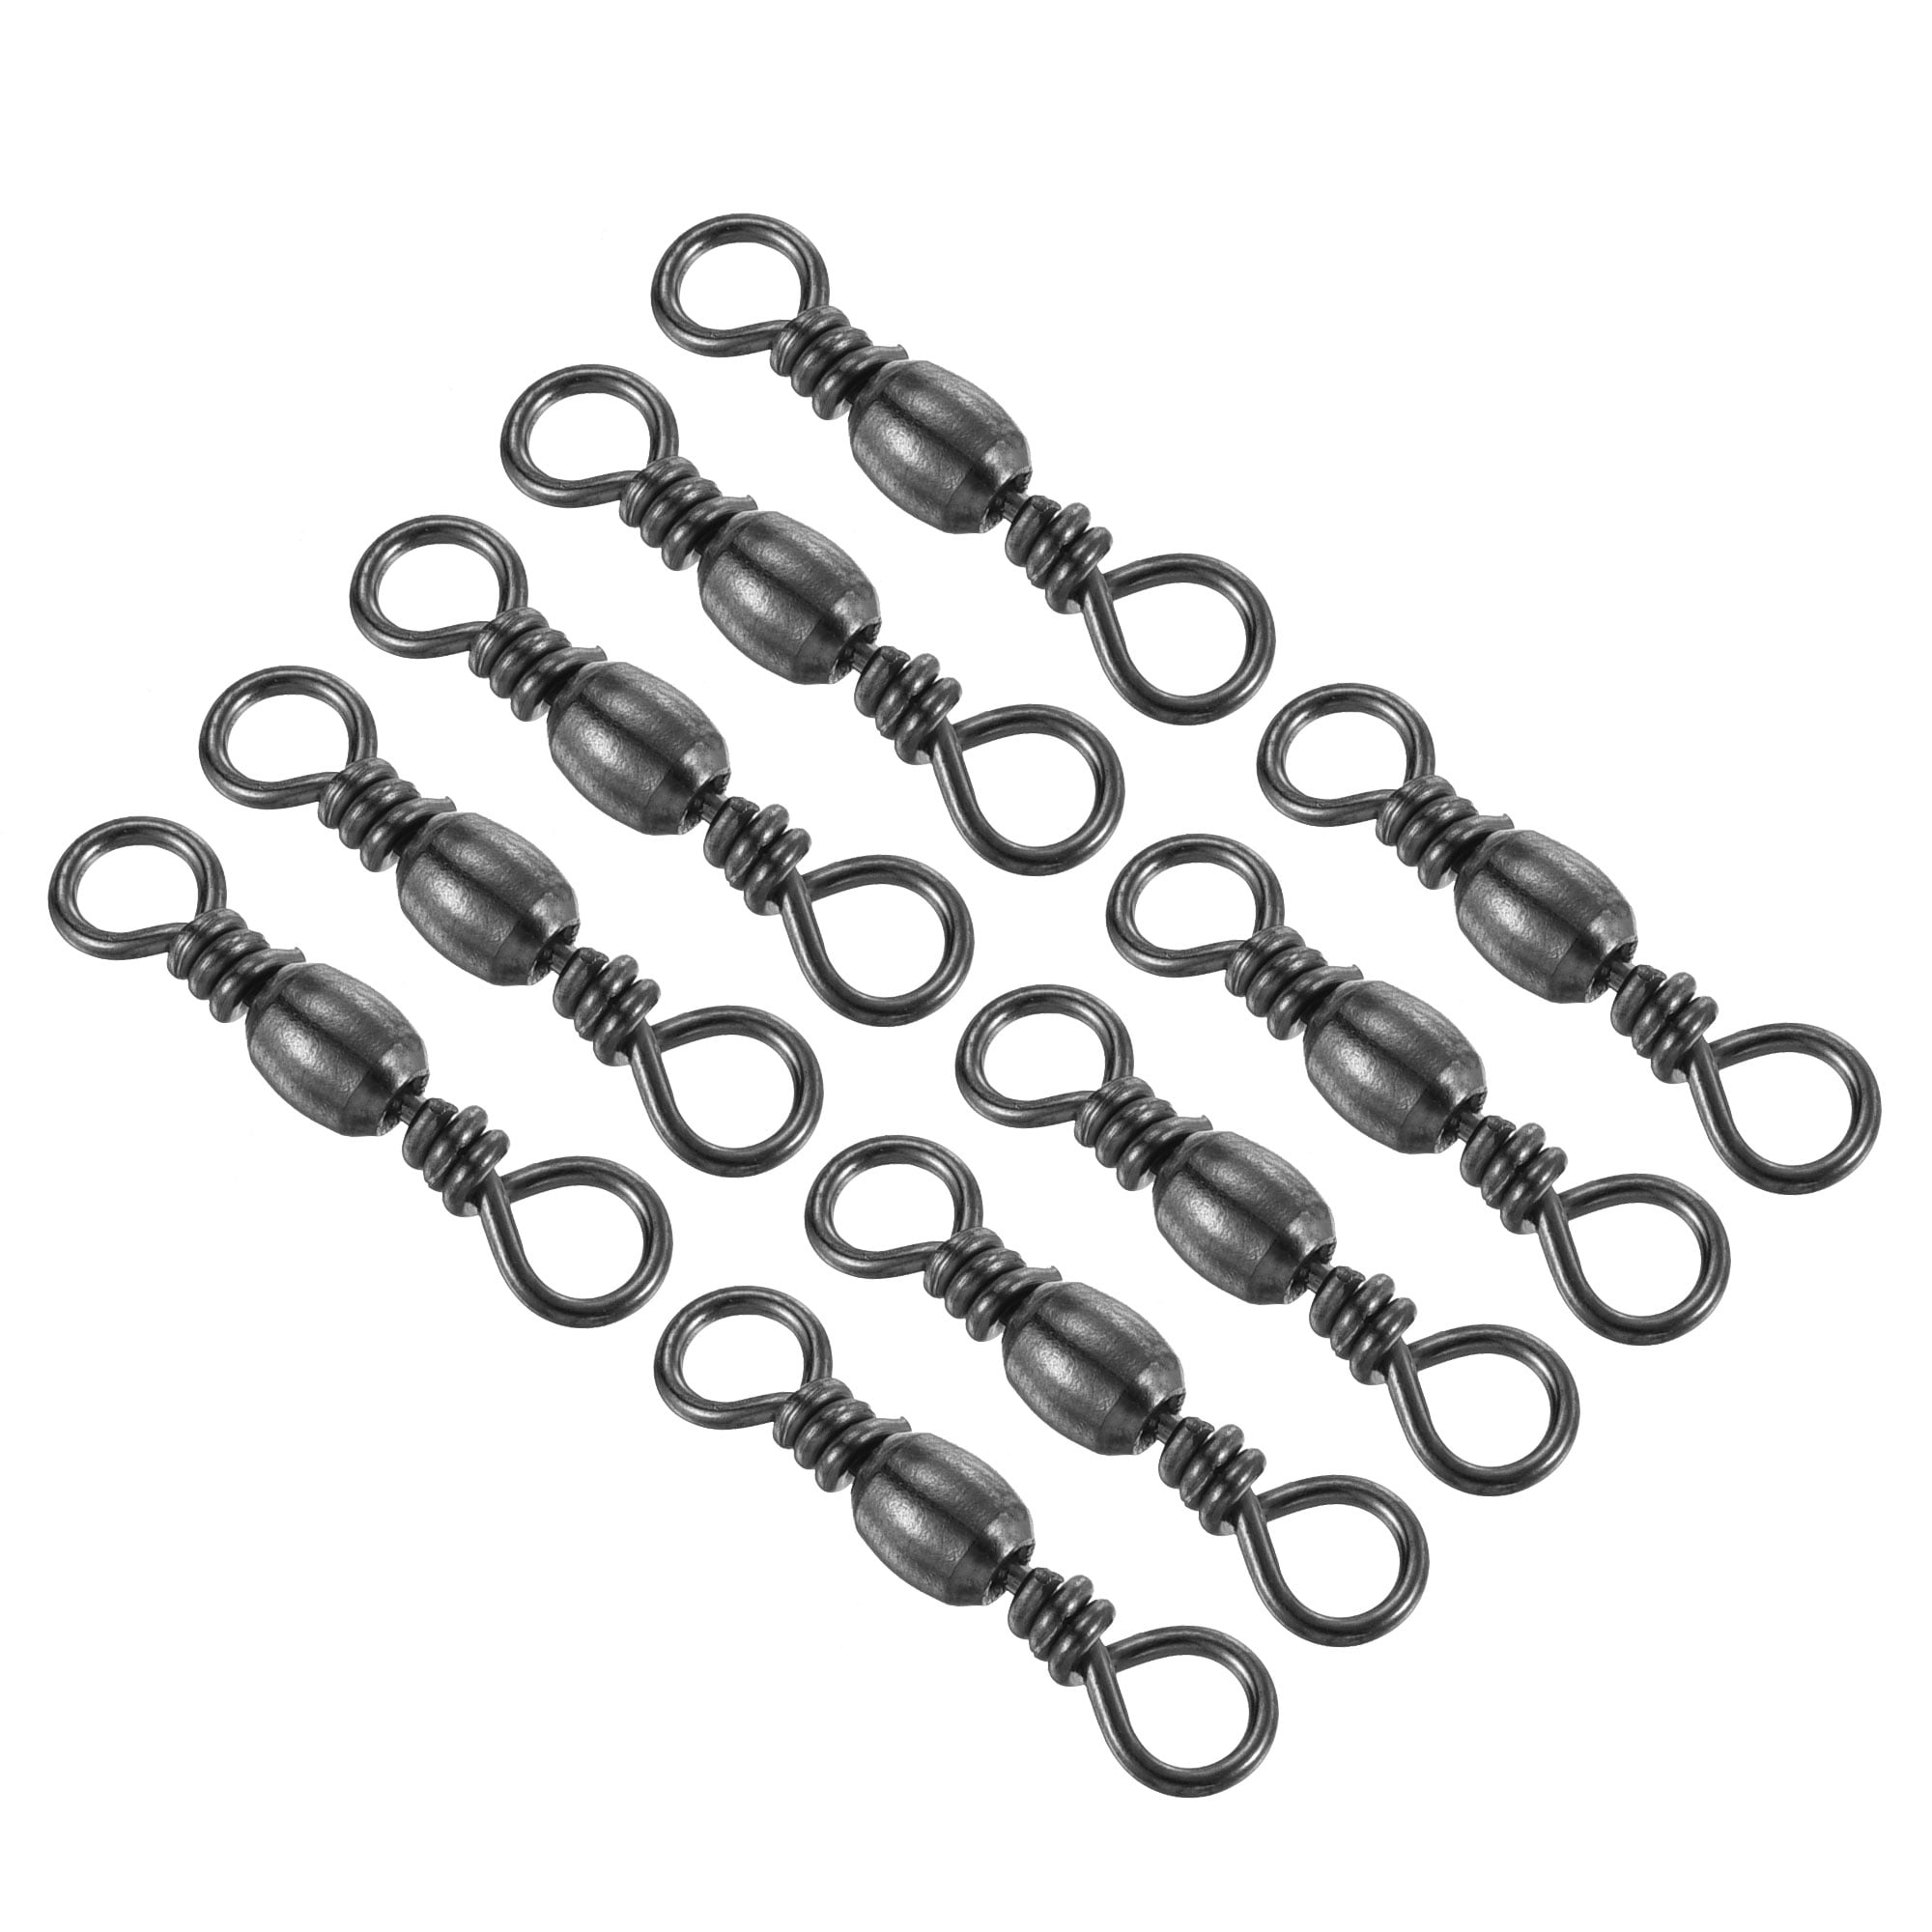 Test 65 Lb -380 Lb 25 Pcs Ball Bearing Swivel Connector Tackle Fishing Accessories Stainless Steel Swivels Solid Welded Rings High Strength Heavy Duty Durability Barrel Game for Saltwater Freshwater 